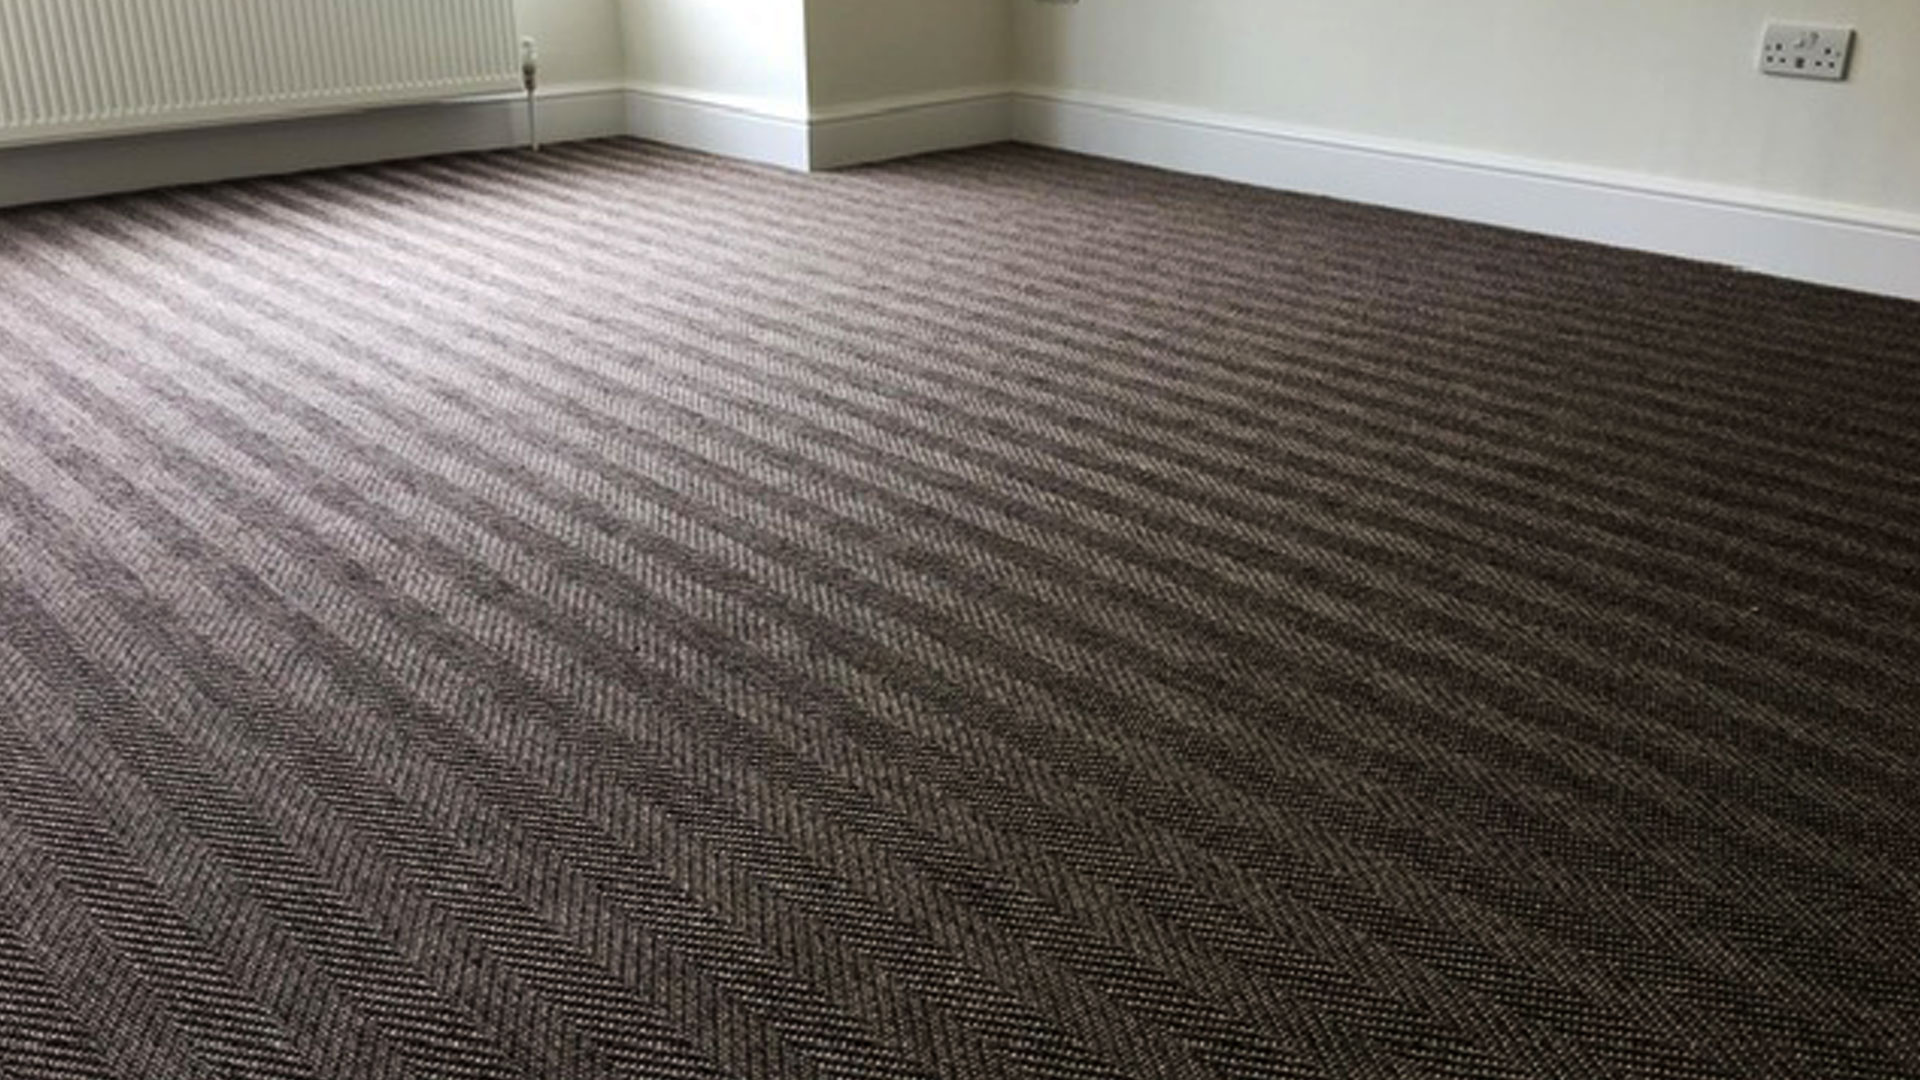 How Are Carpets an Important Flooring Option?